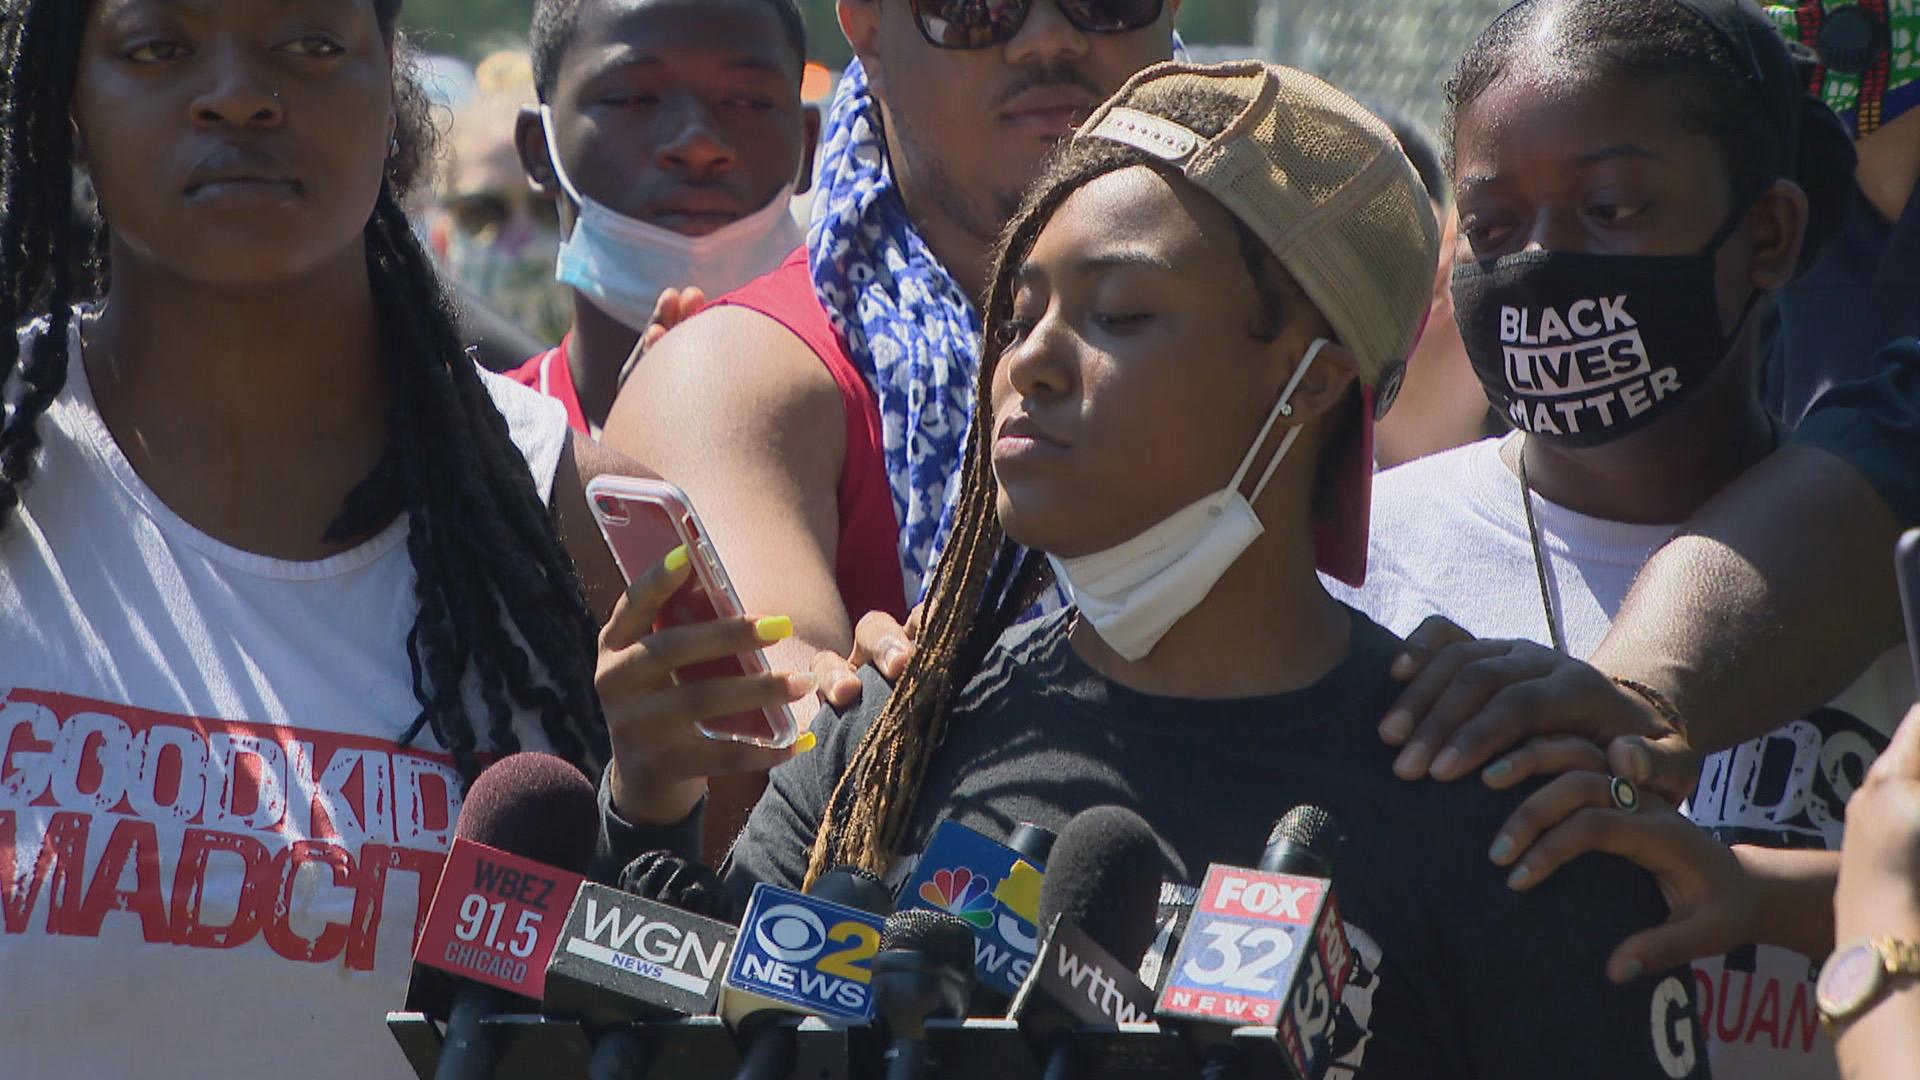 Miracle Boyd reads a statement from her phone at a press conference Monday, July 20, 2020. (WTTW News)